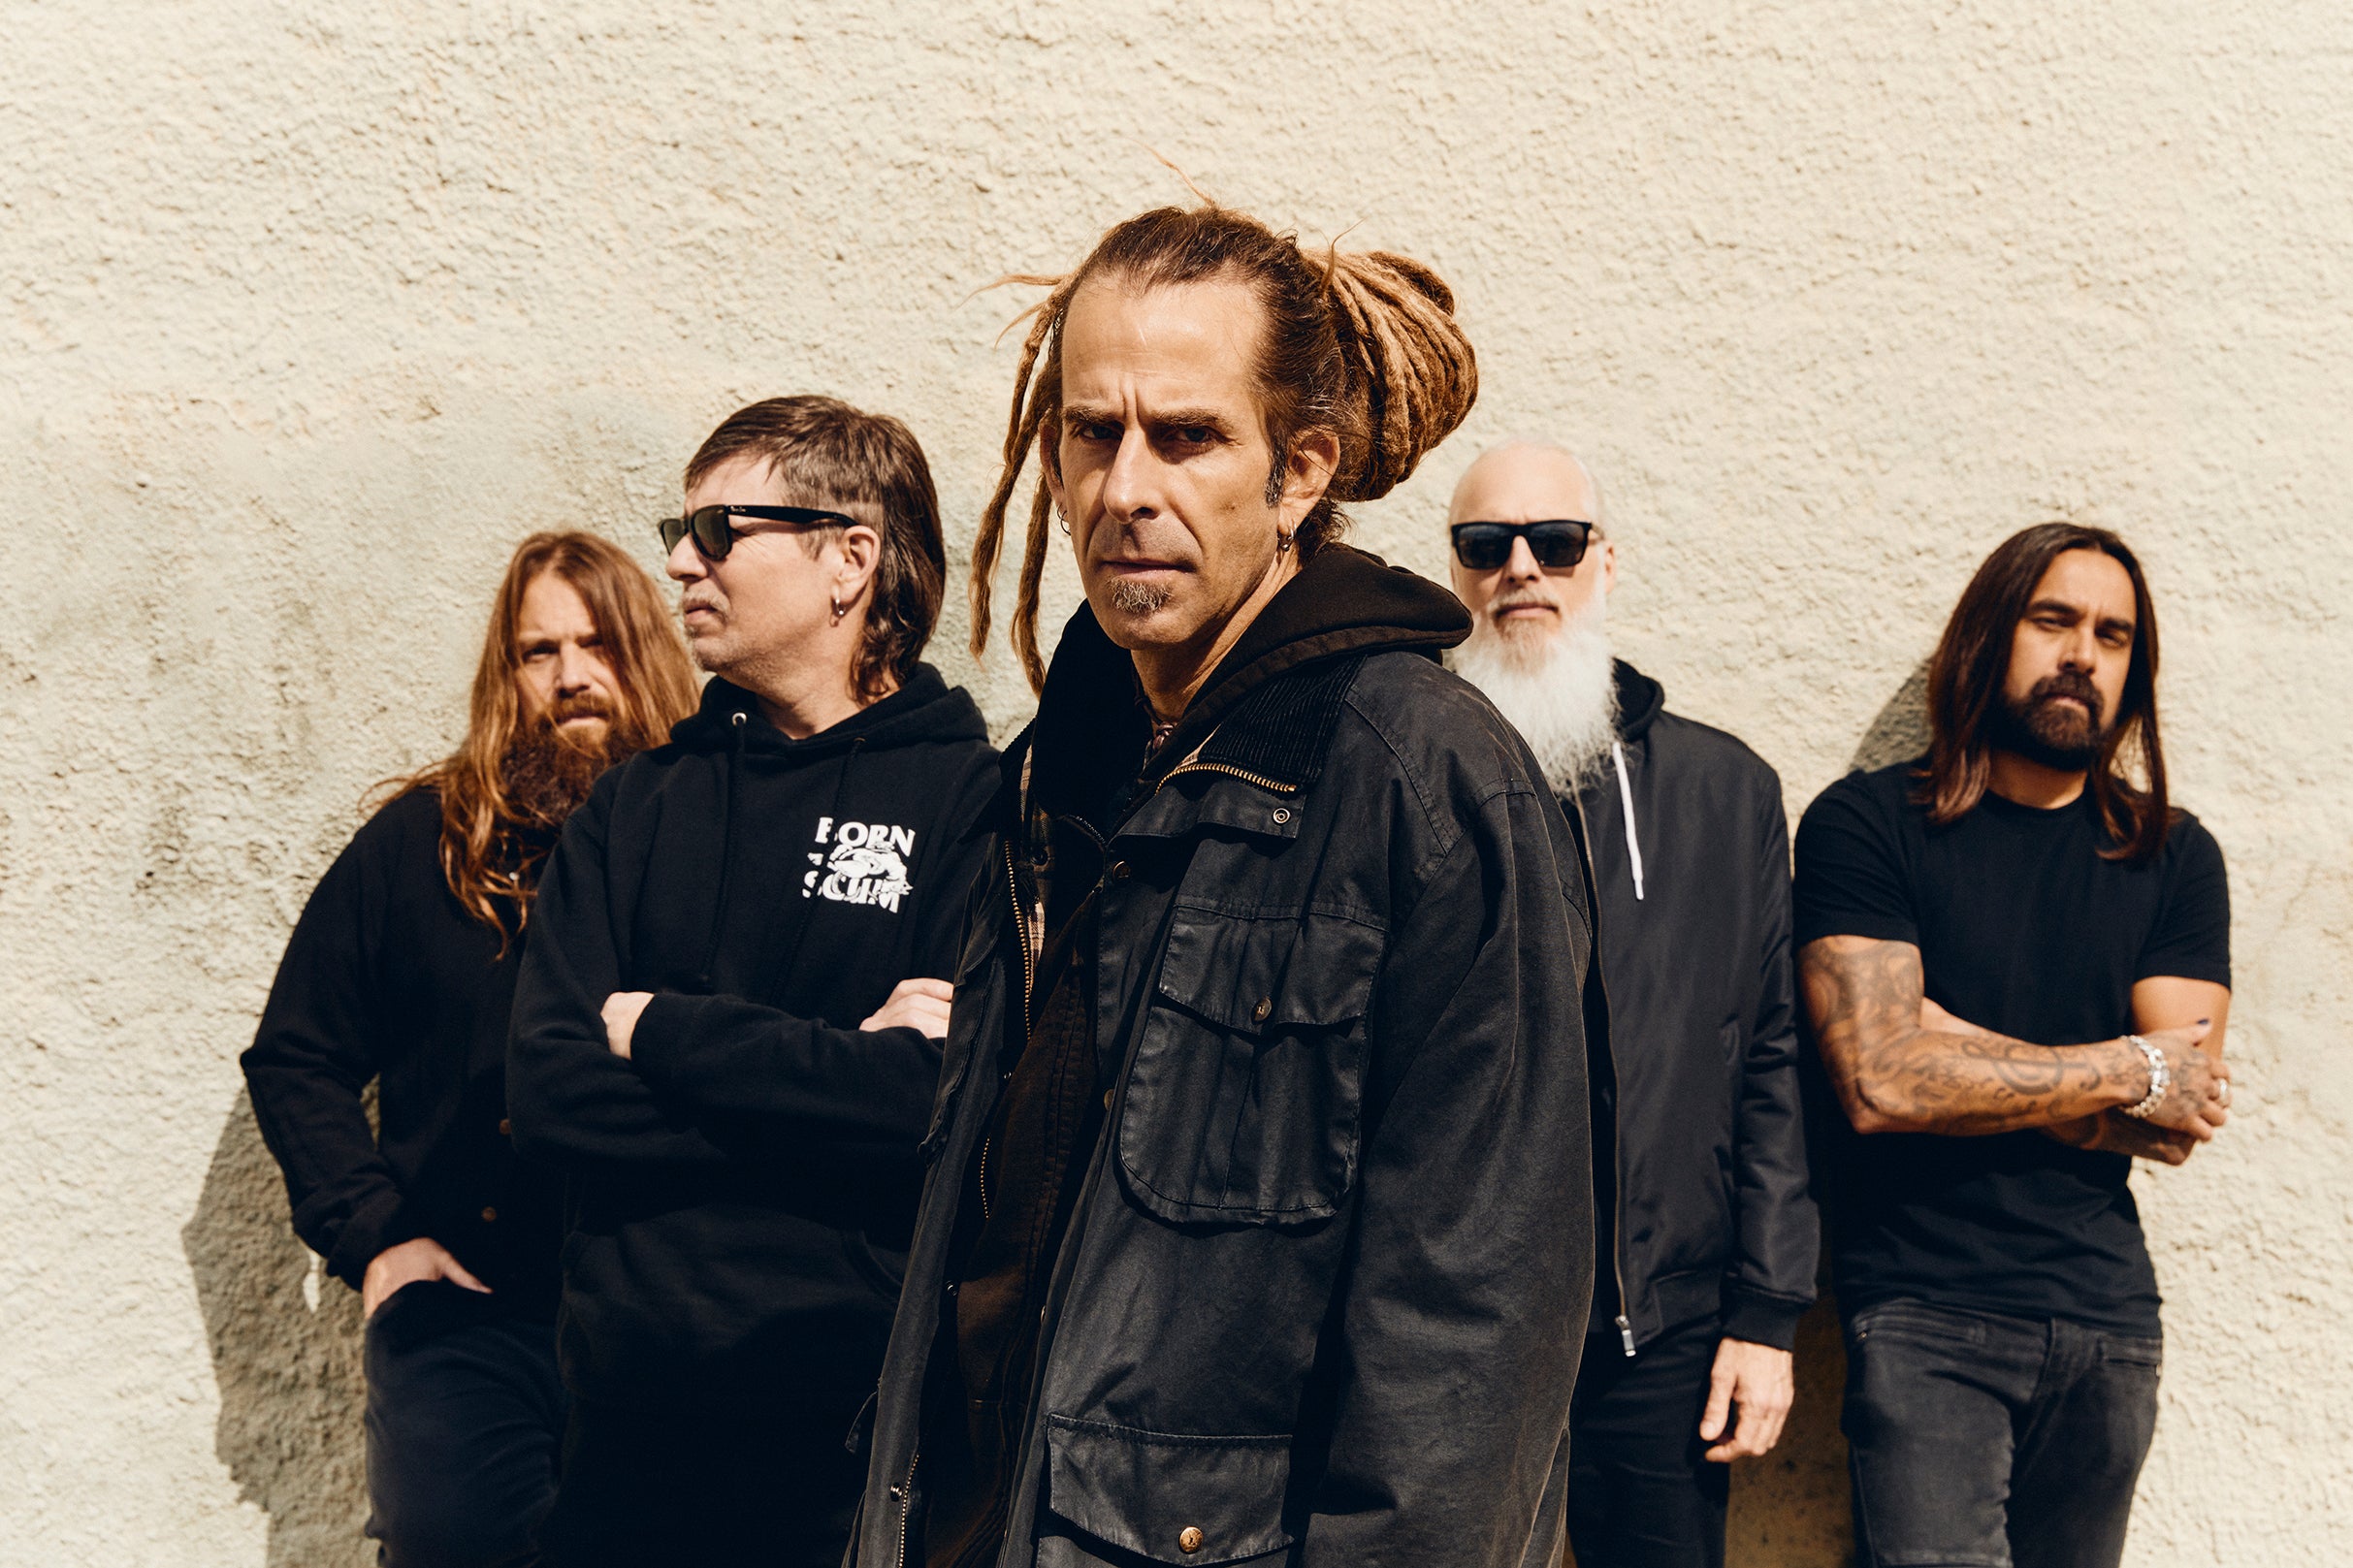 members only presale code for Lamb Of God & Mastodon: ASHES OF LEVIATHAN TOUR presale tickets in Jacksonville